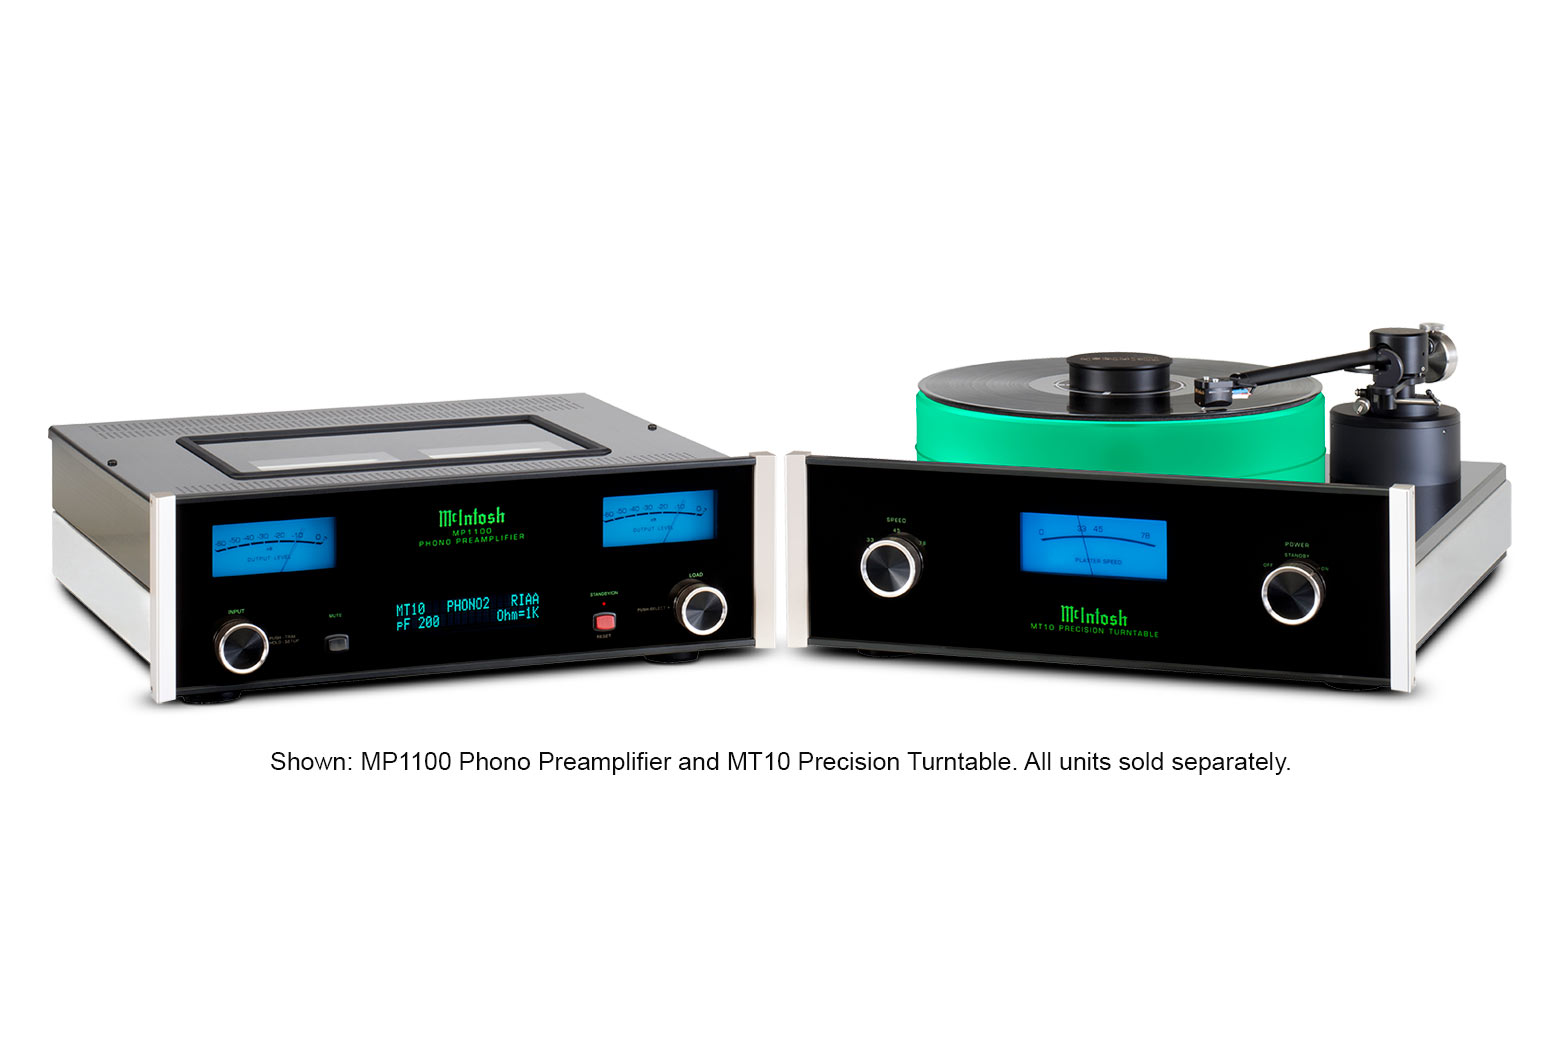 McIntosh MP1100 Phono Preamplifier and MT10 Precision Turntable